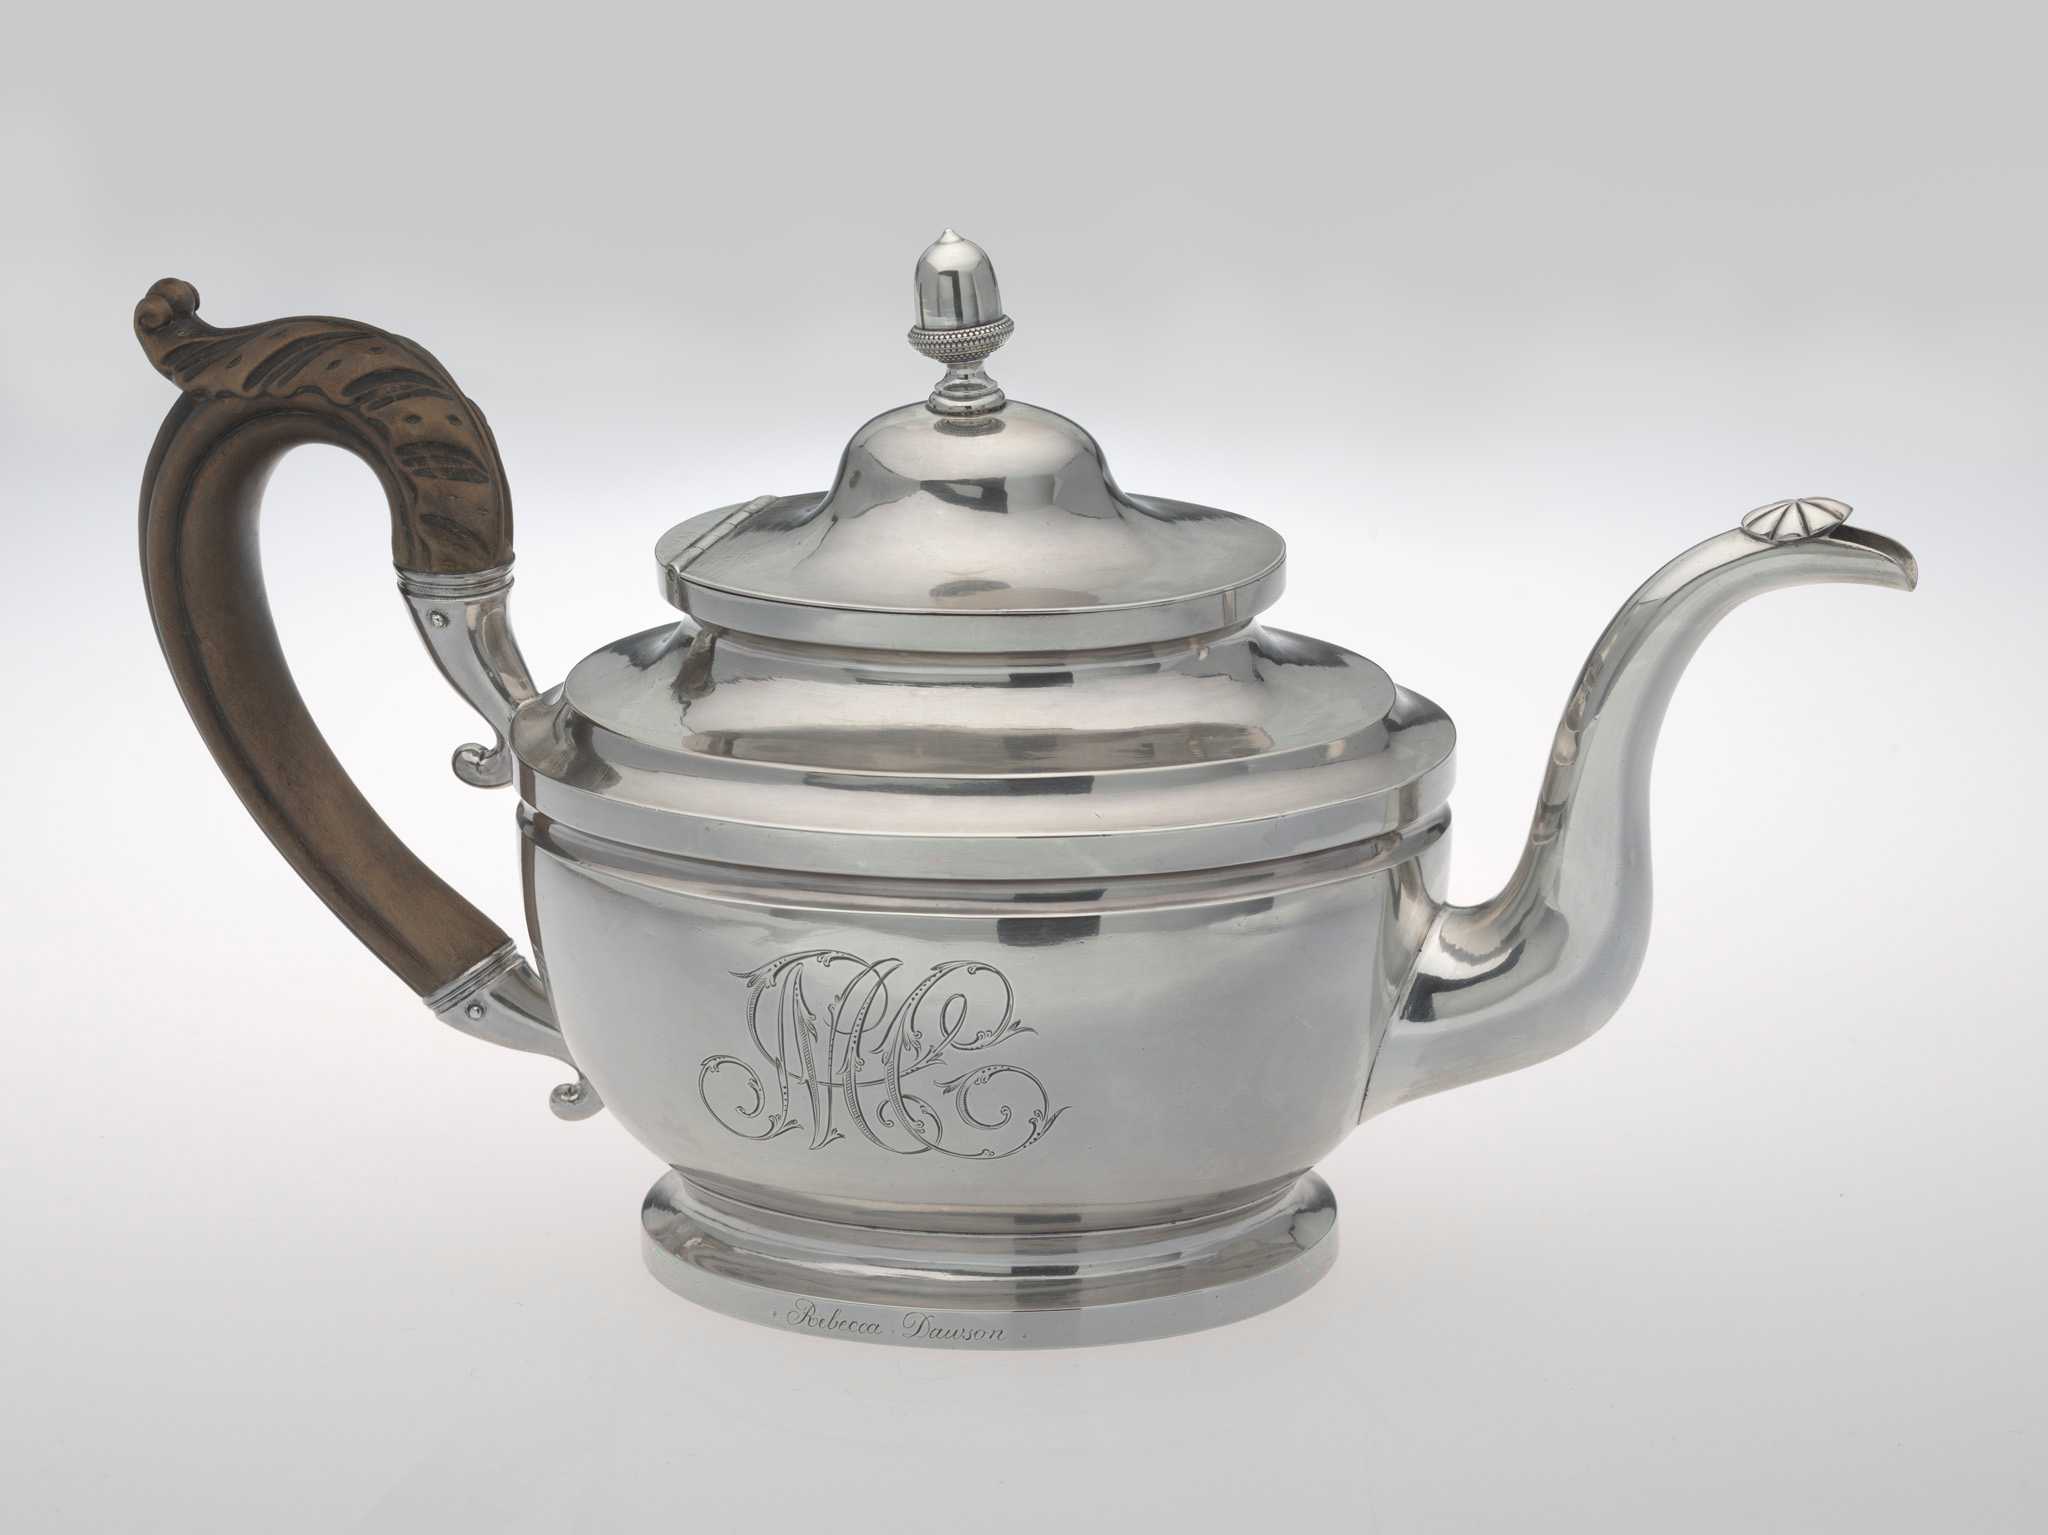 The silver teapot has an oval vase-shape on a spreading pedestal foot, with curved spout capped by an incised patera and wooden leaf-capped scroll handle, and hinged domed cover with acorn finial. The scripted monogram "MC" has been engraved on the side and the name "Rebecca Dawson" has been engraved along the bottom rim.